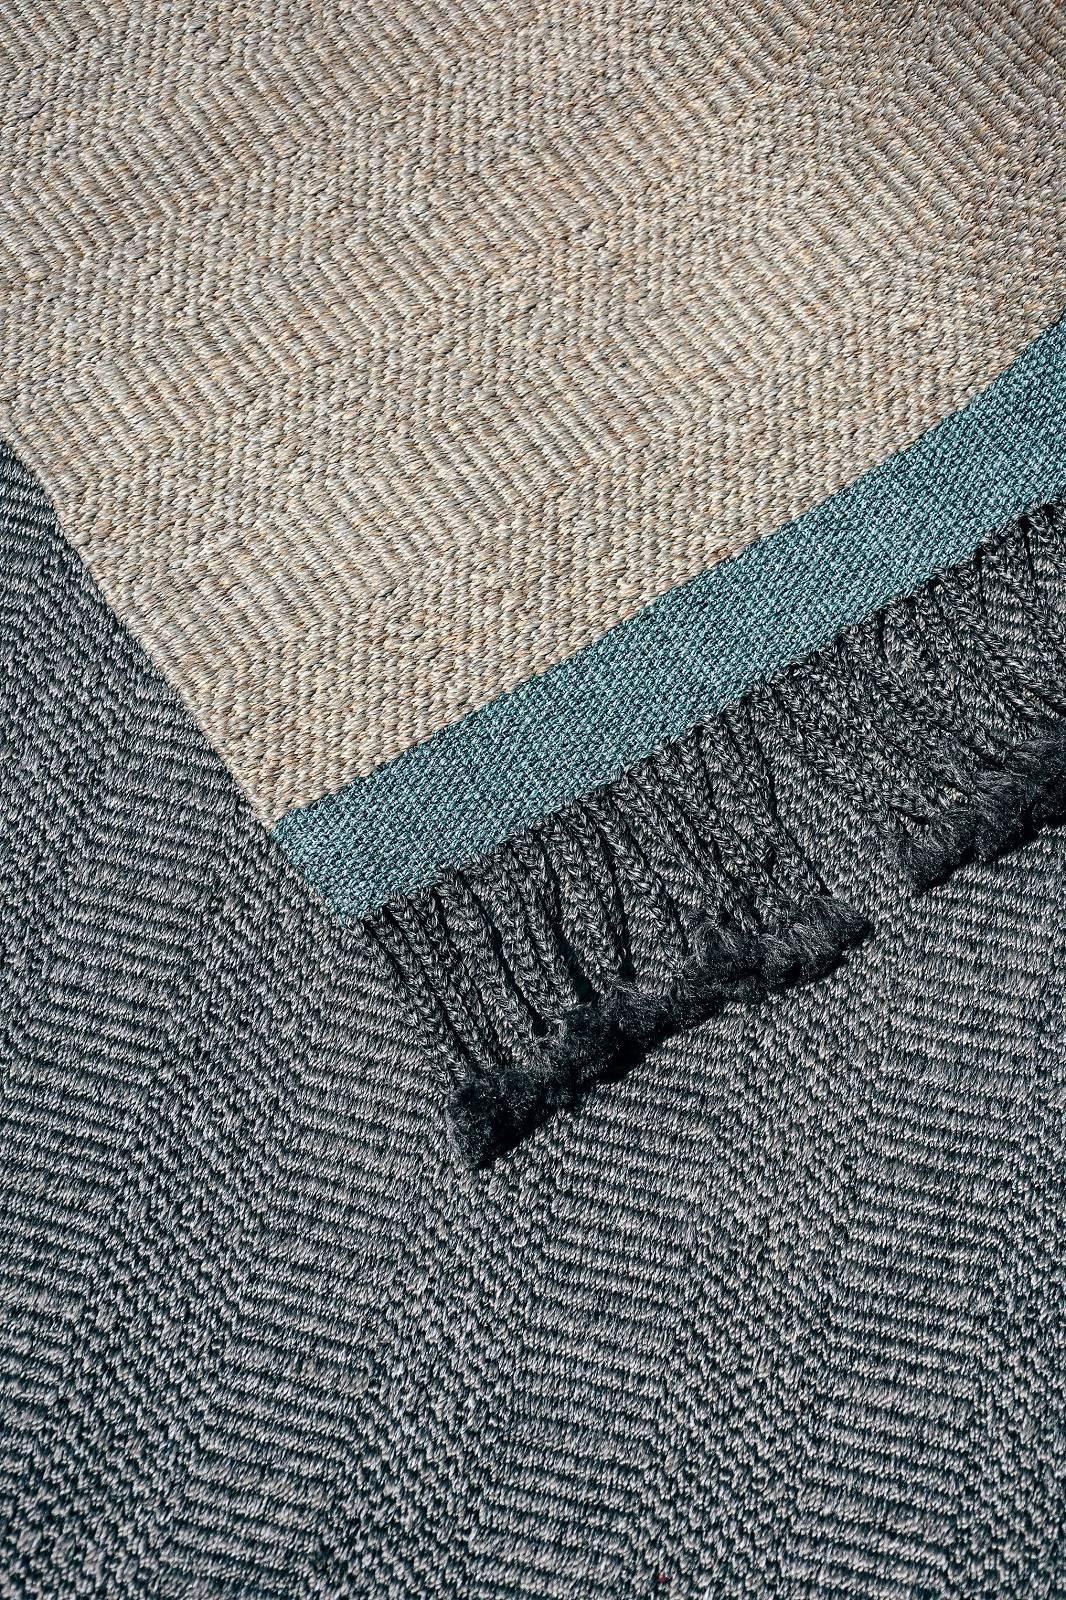 rug side view